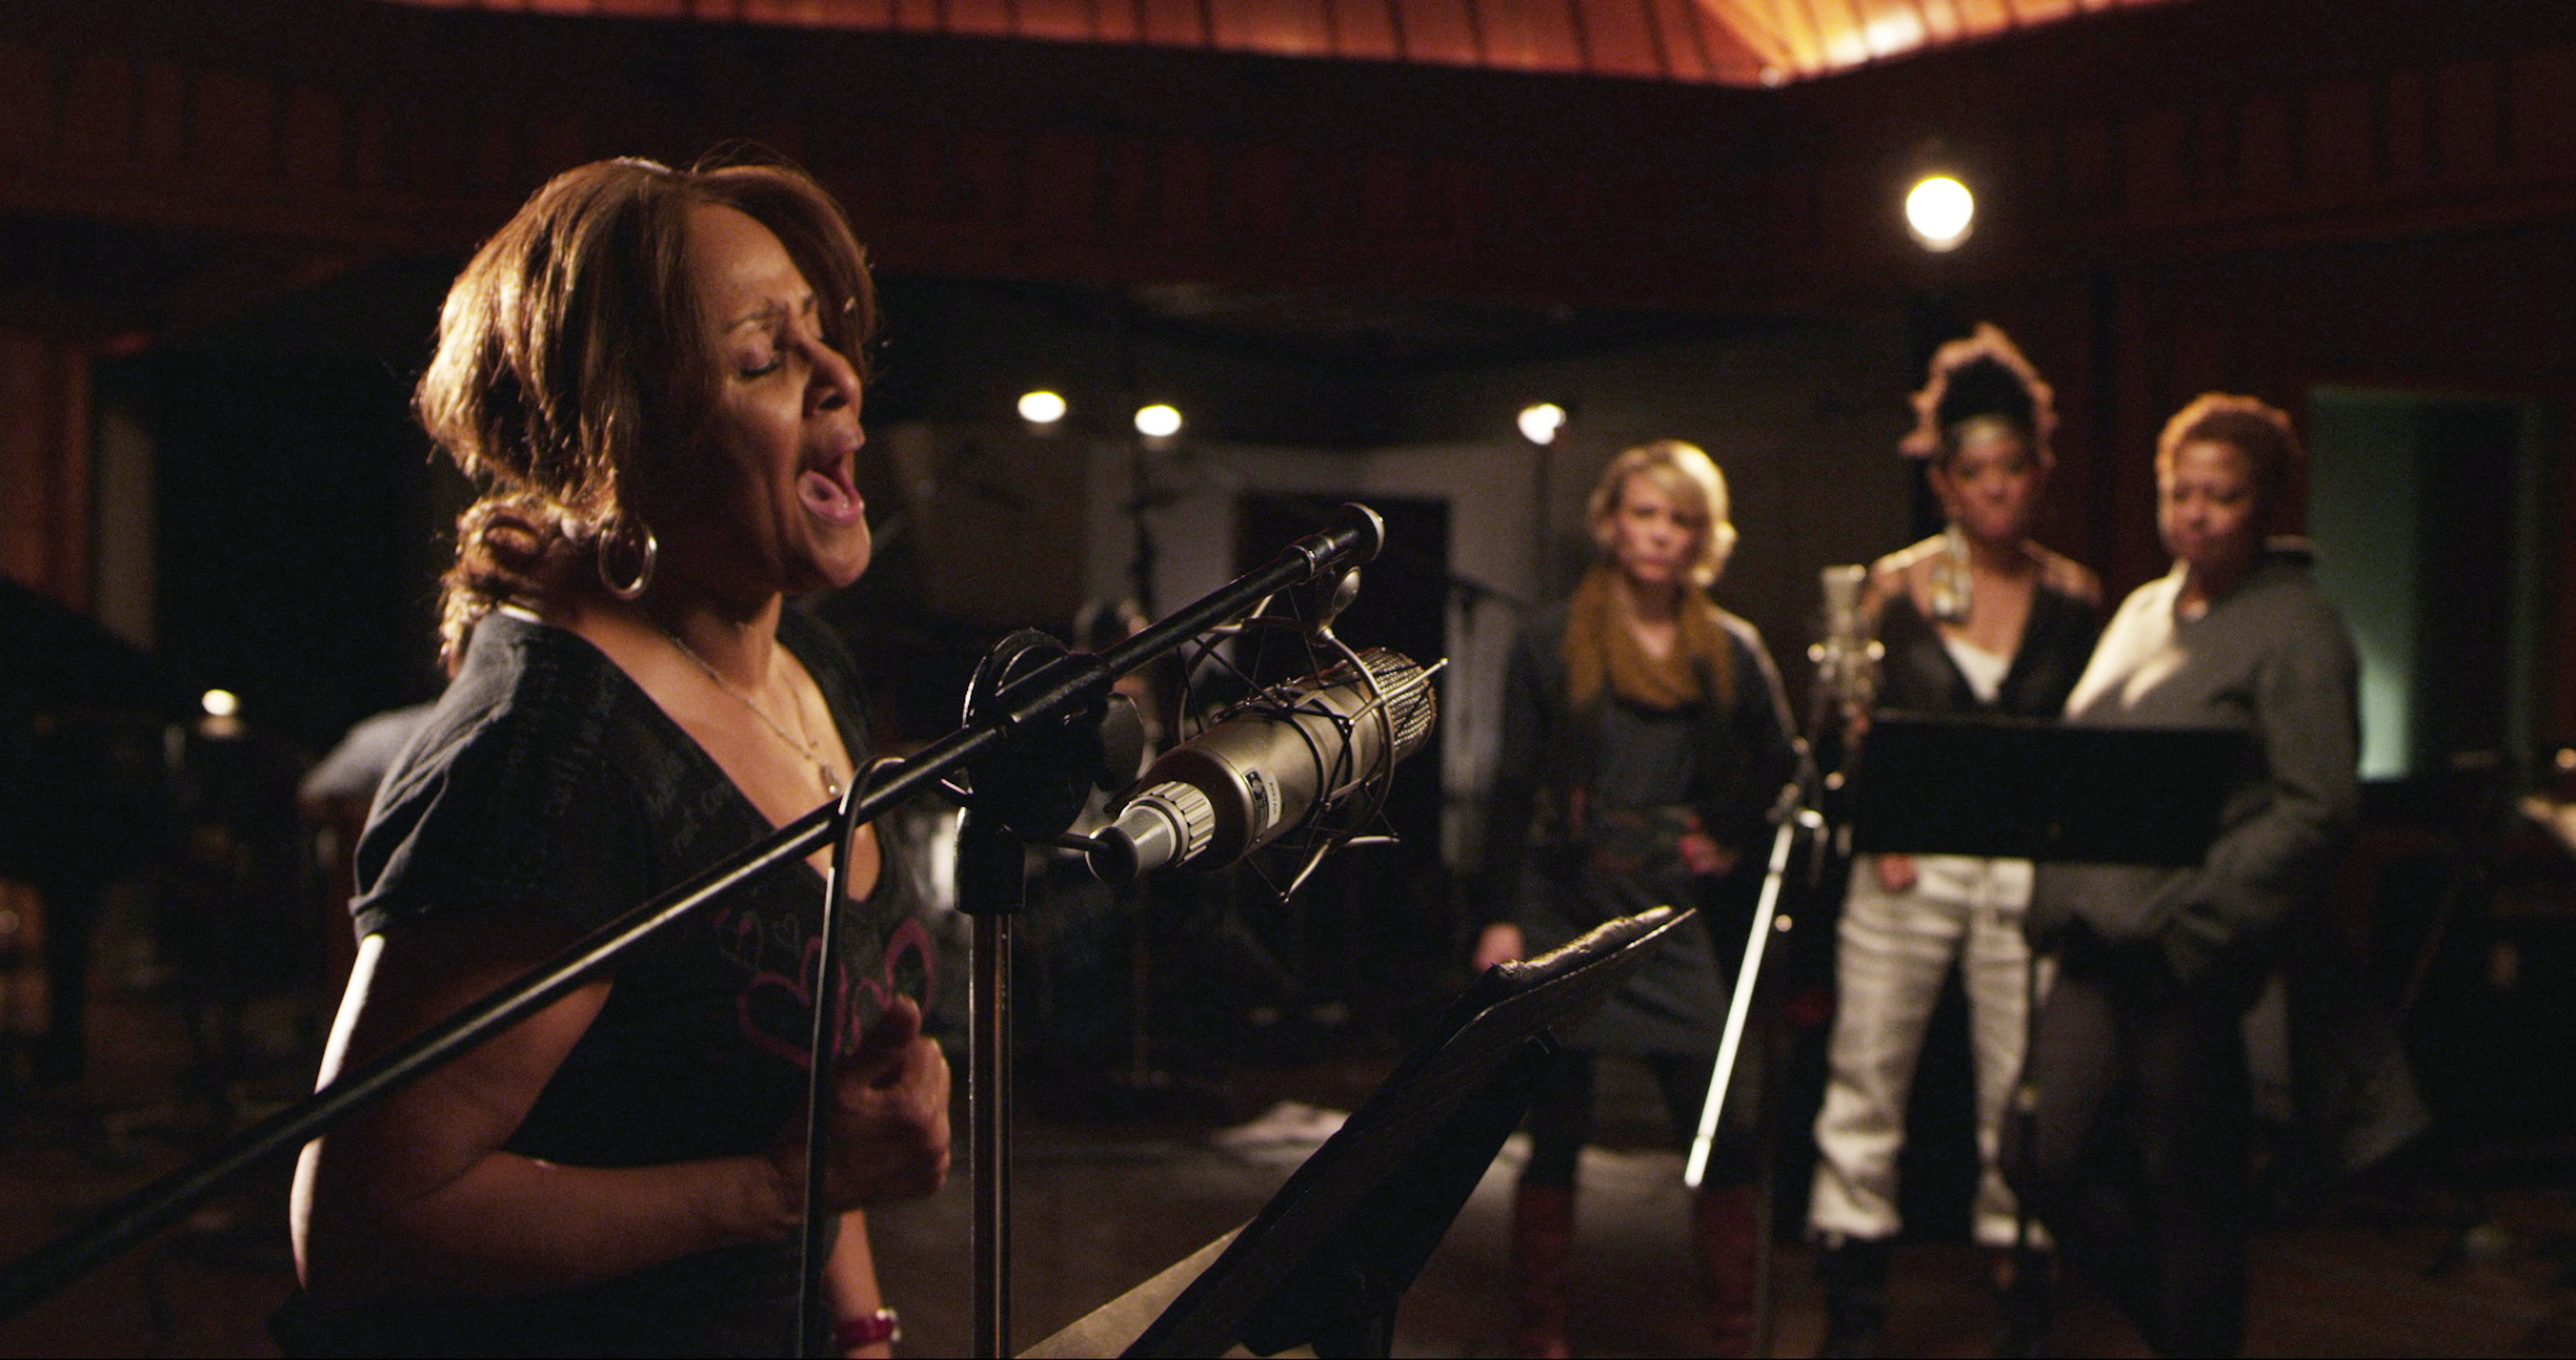 Darlene Love singing with Jo Lawry, Judith Hill, and Lisa Fischer in the background.